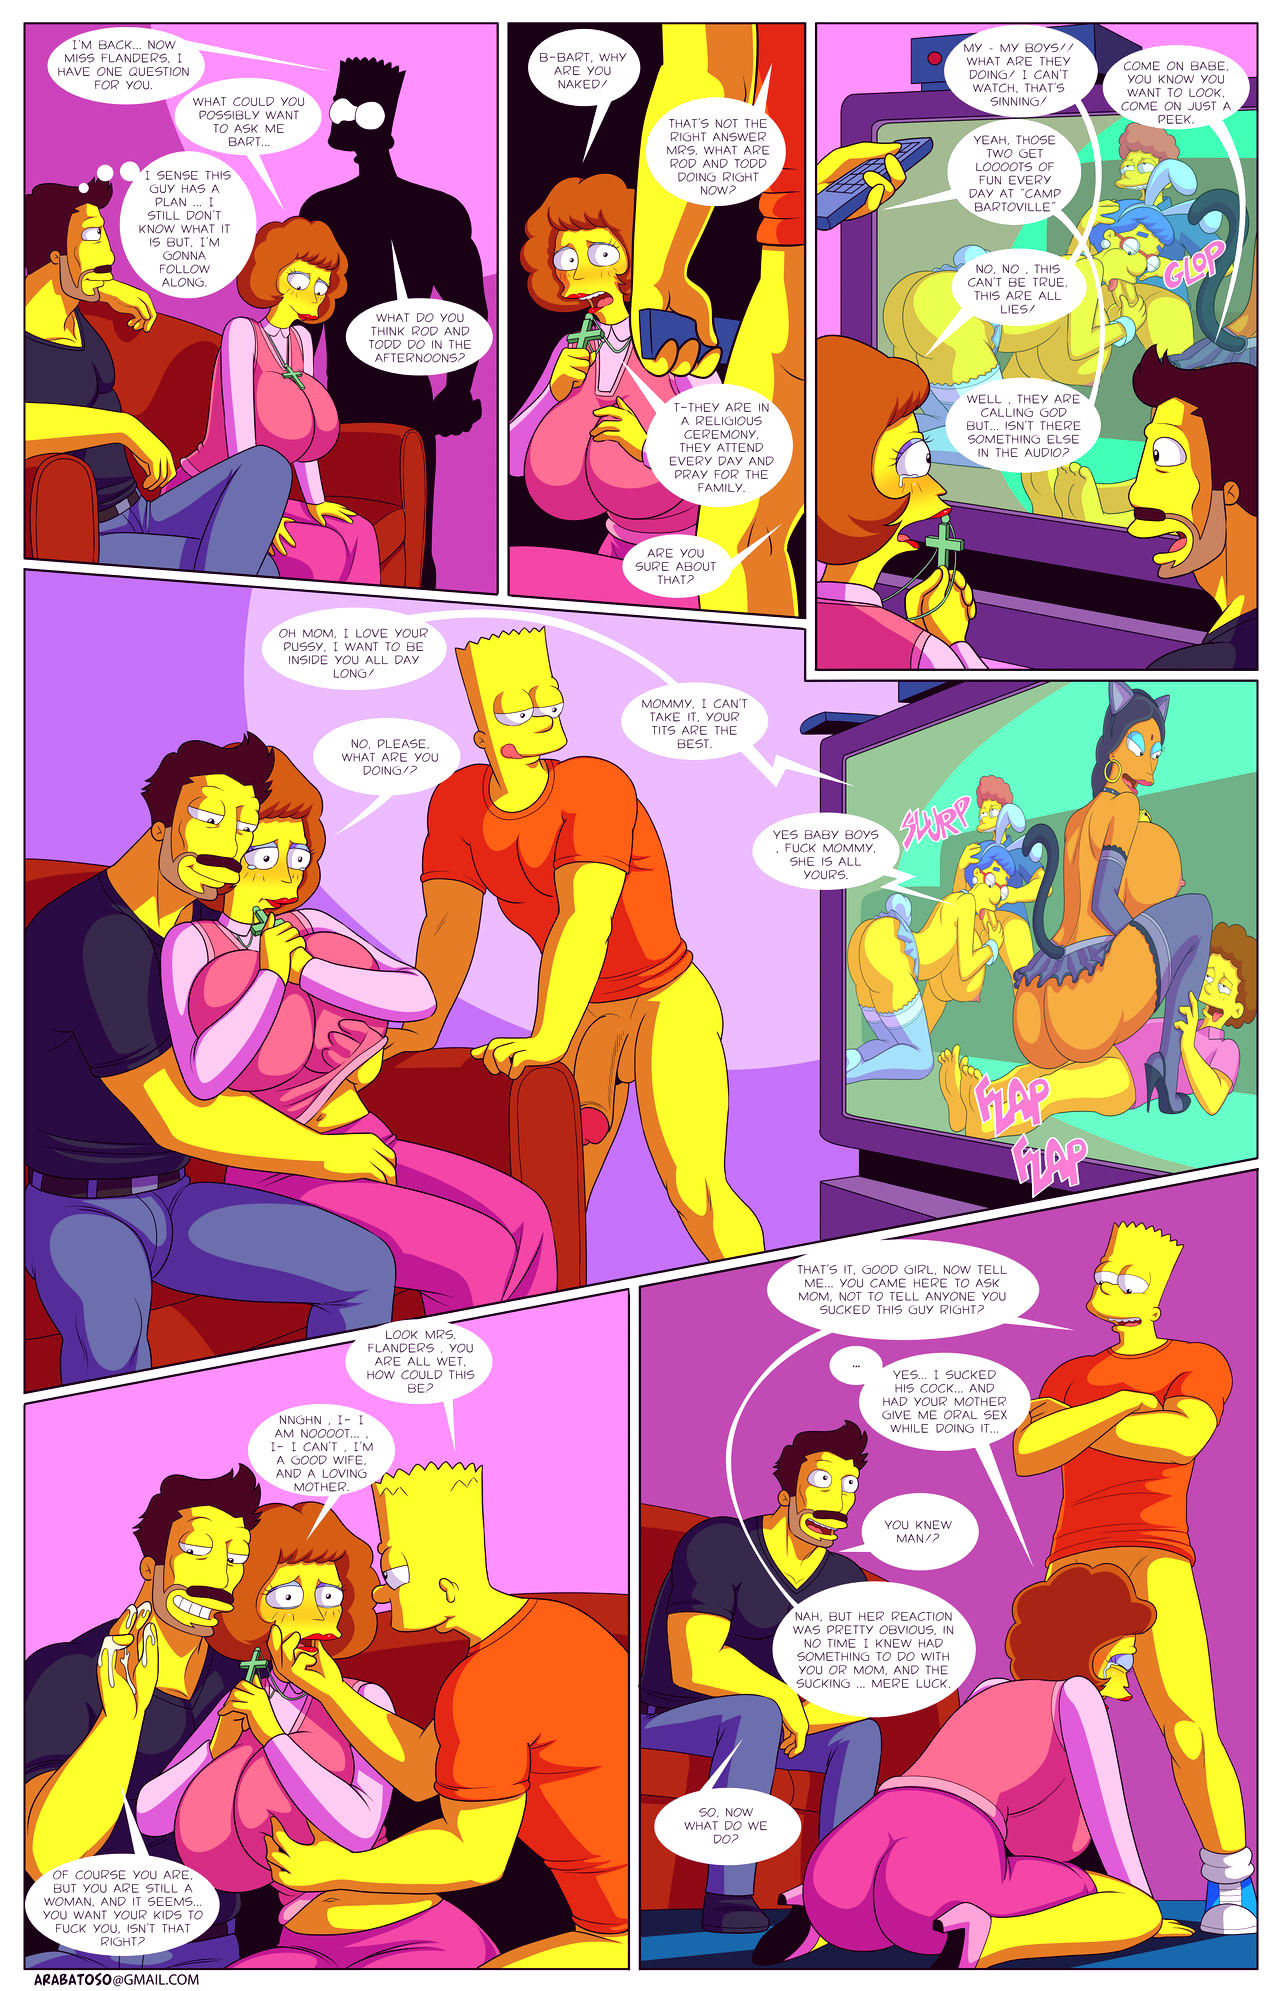 Darrens adventure or welcome to springfield porn comic picture 35